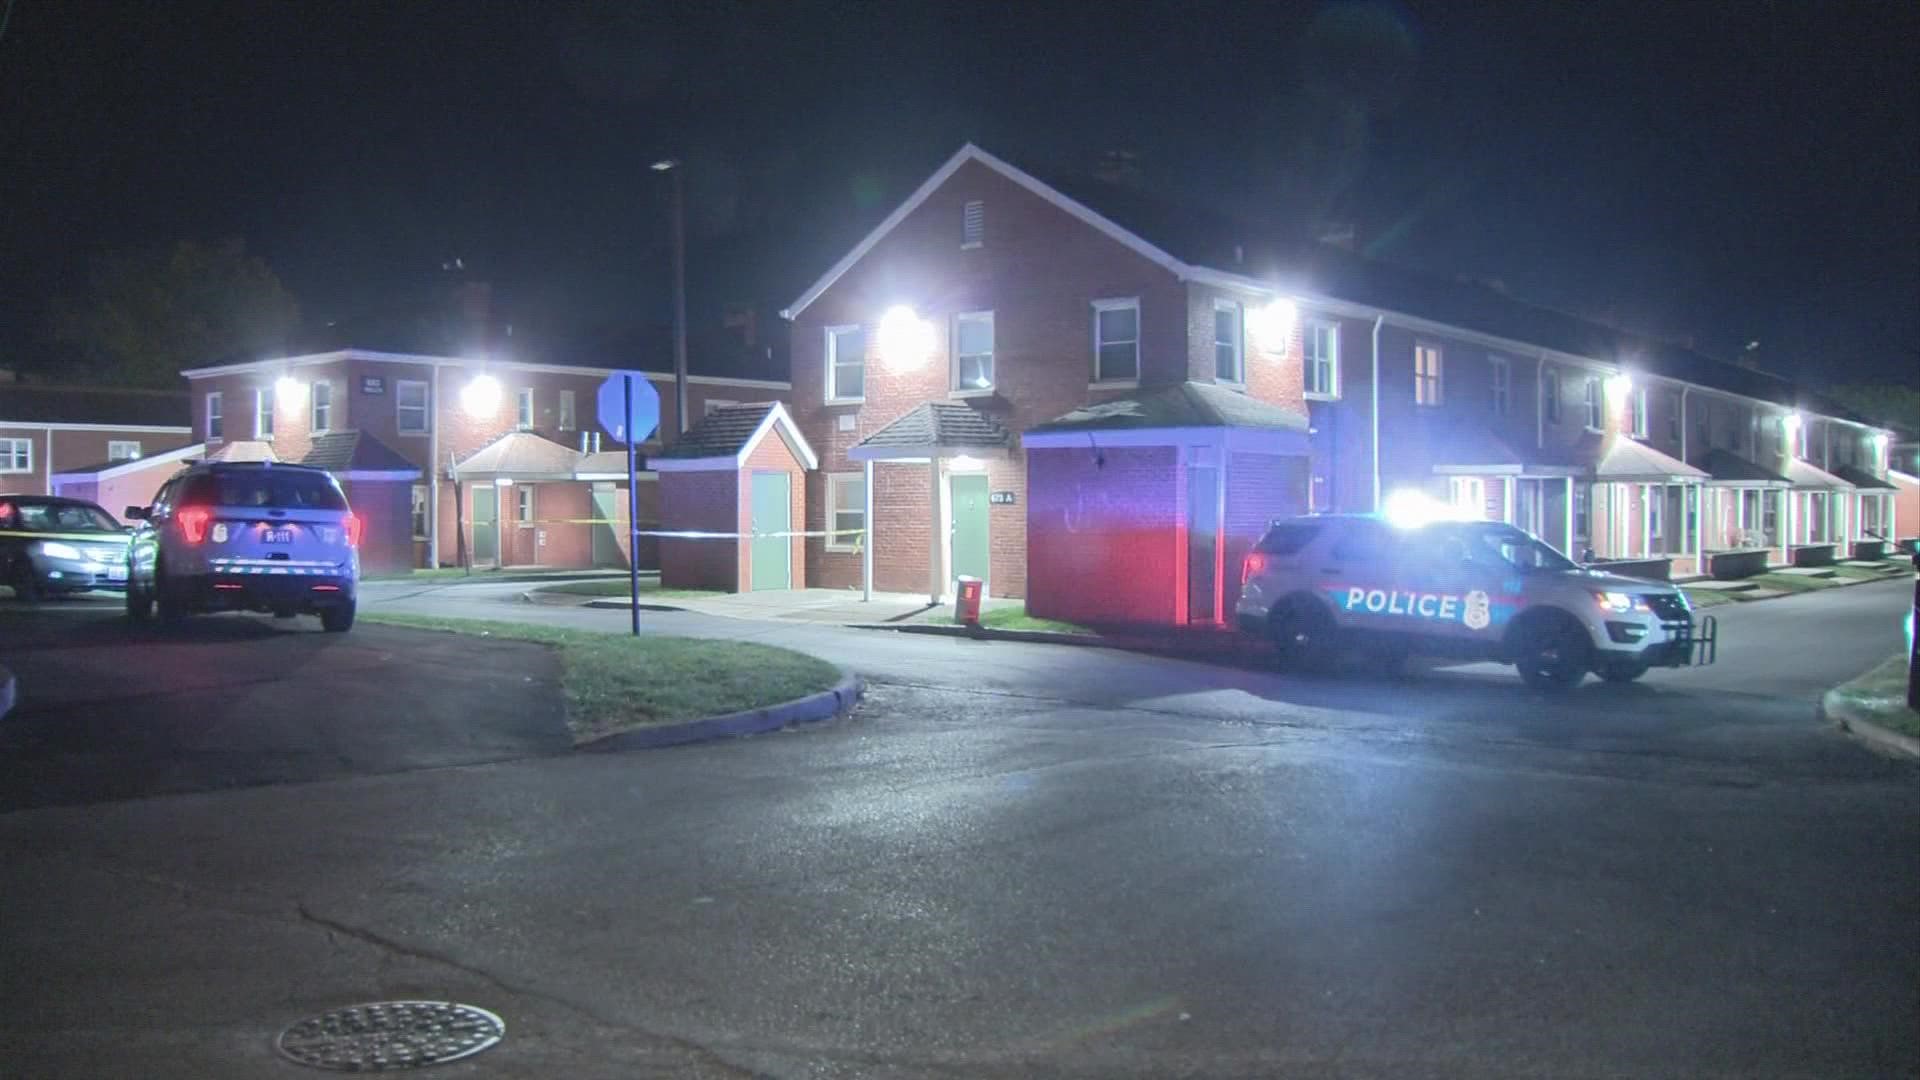 Police said the shooting happened around 11 p.m. in the 600 block of East Morrill Avenue.